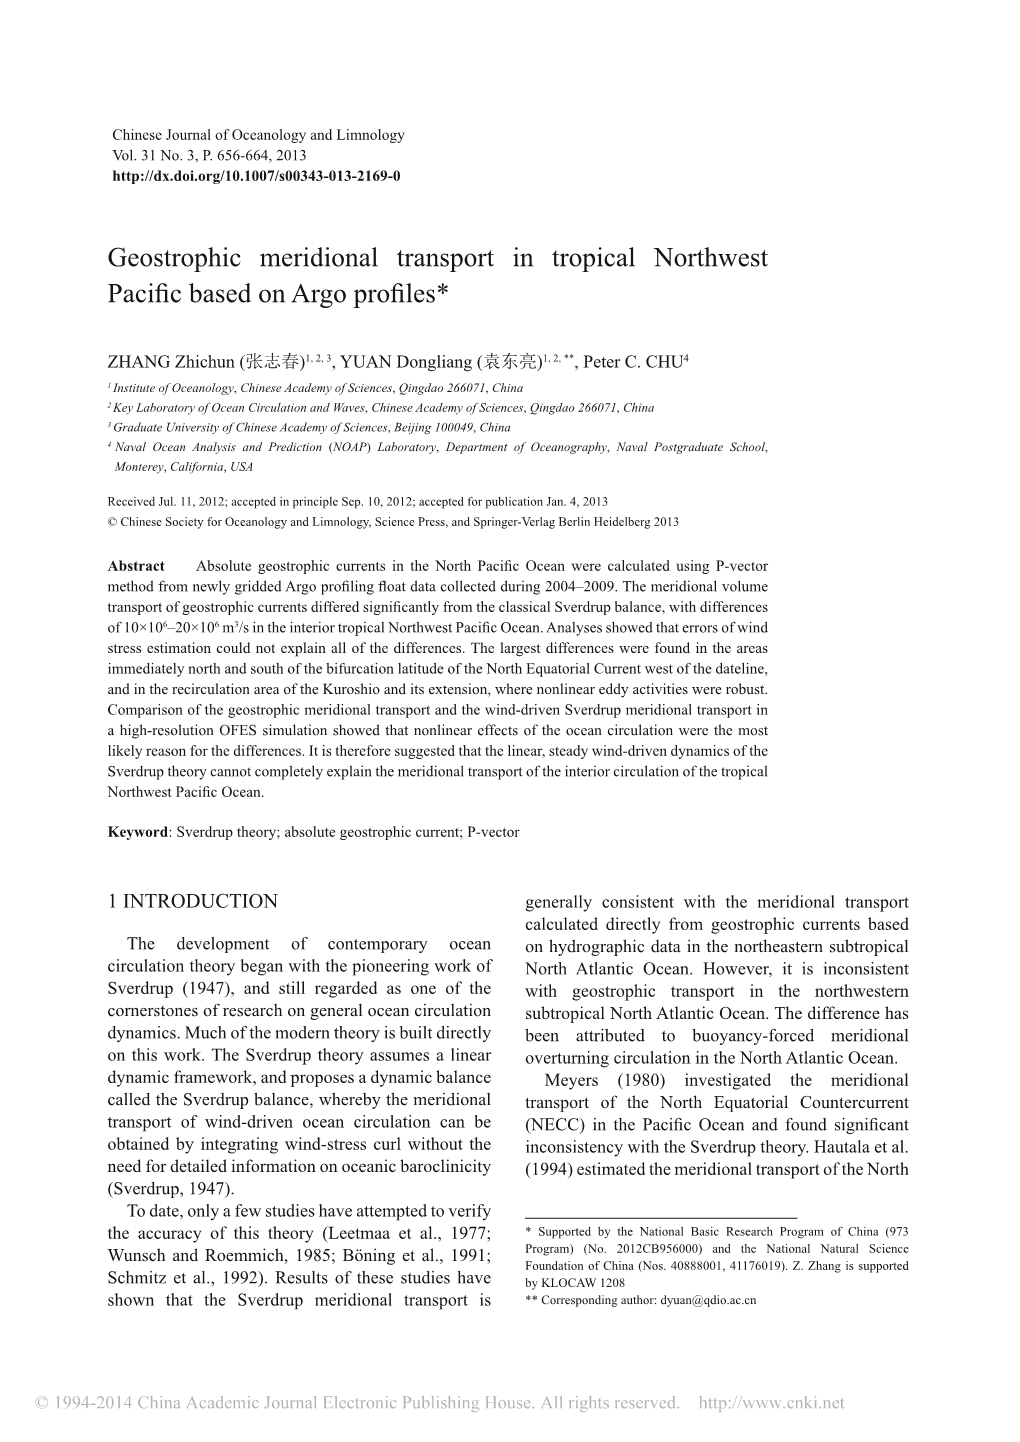 Geostrophic Meridional Transport in Tropical Northwest Pacific Based On